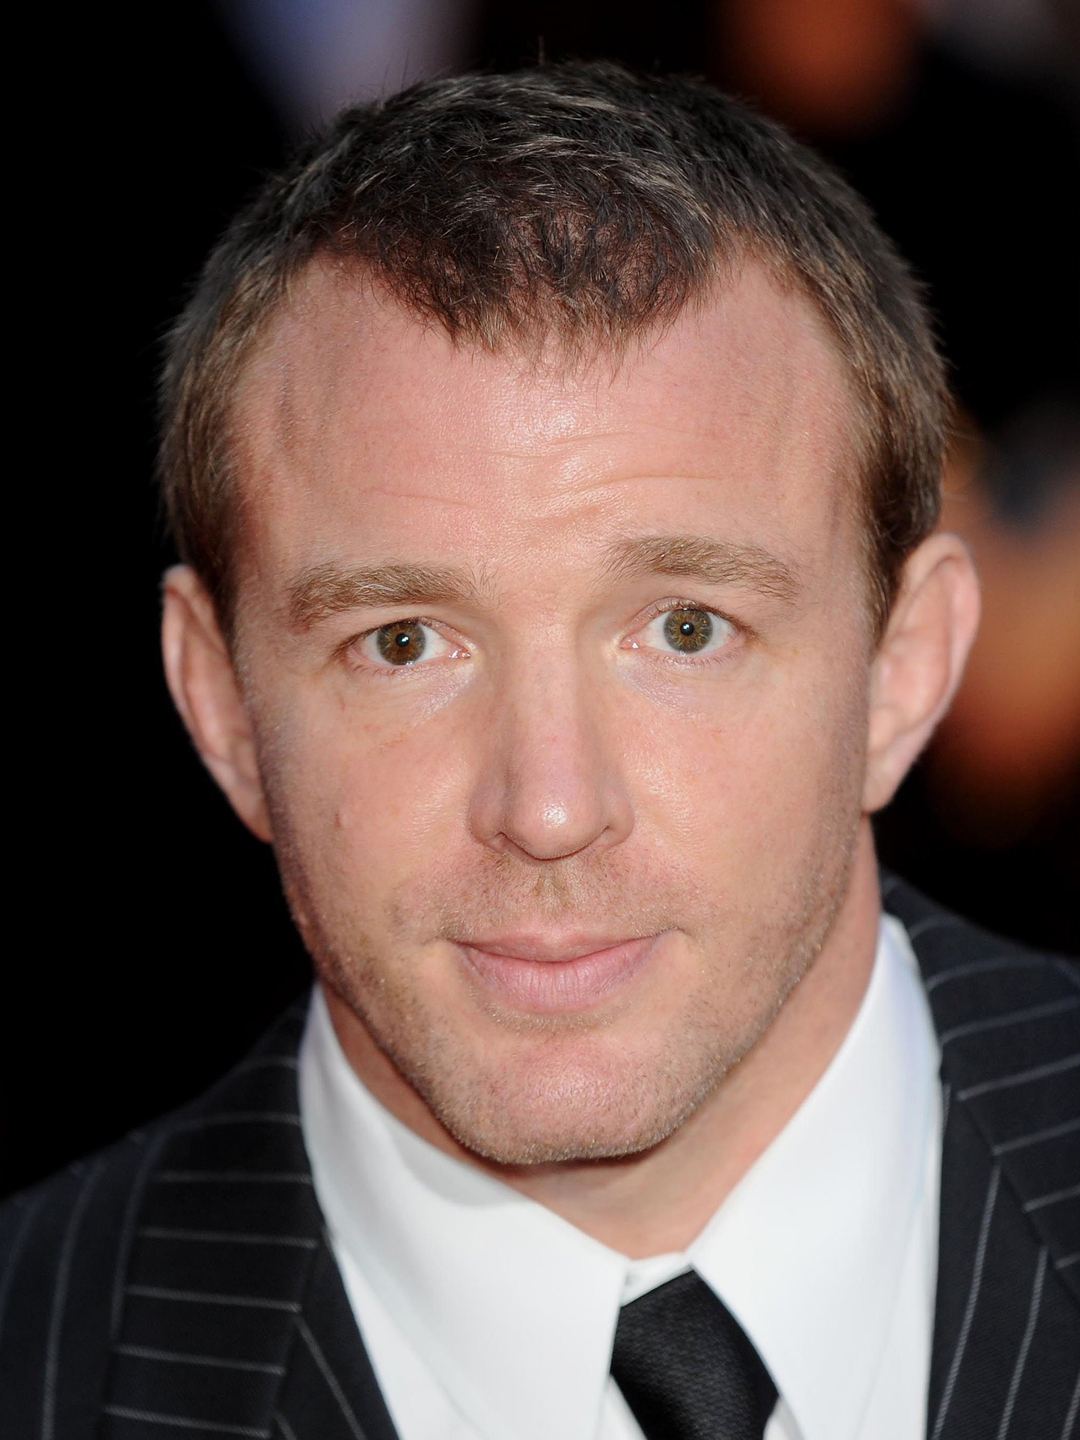 Guy Ritchie height and weight